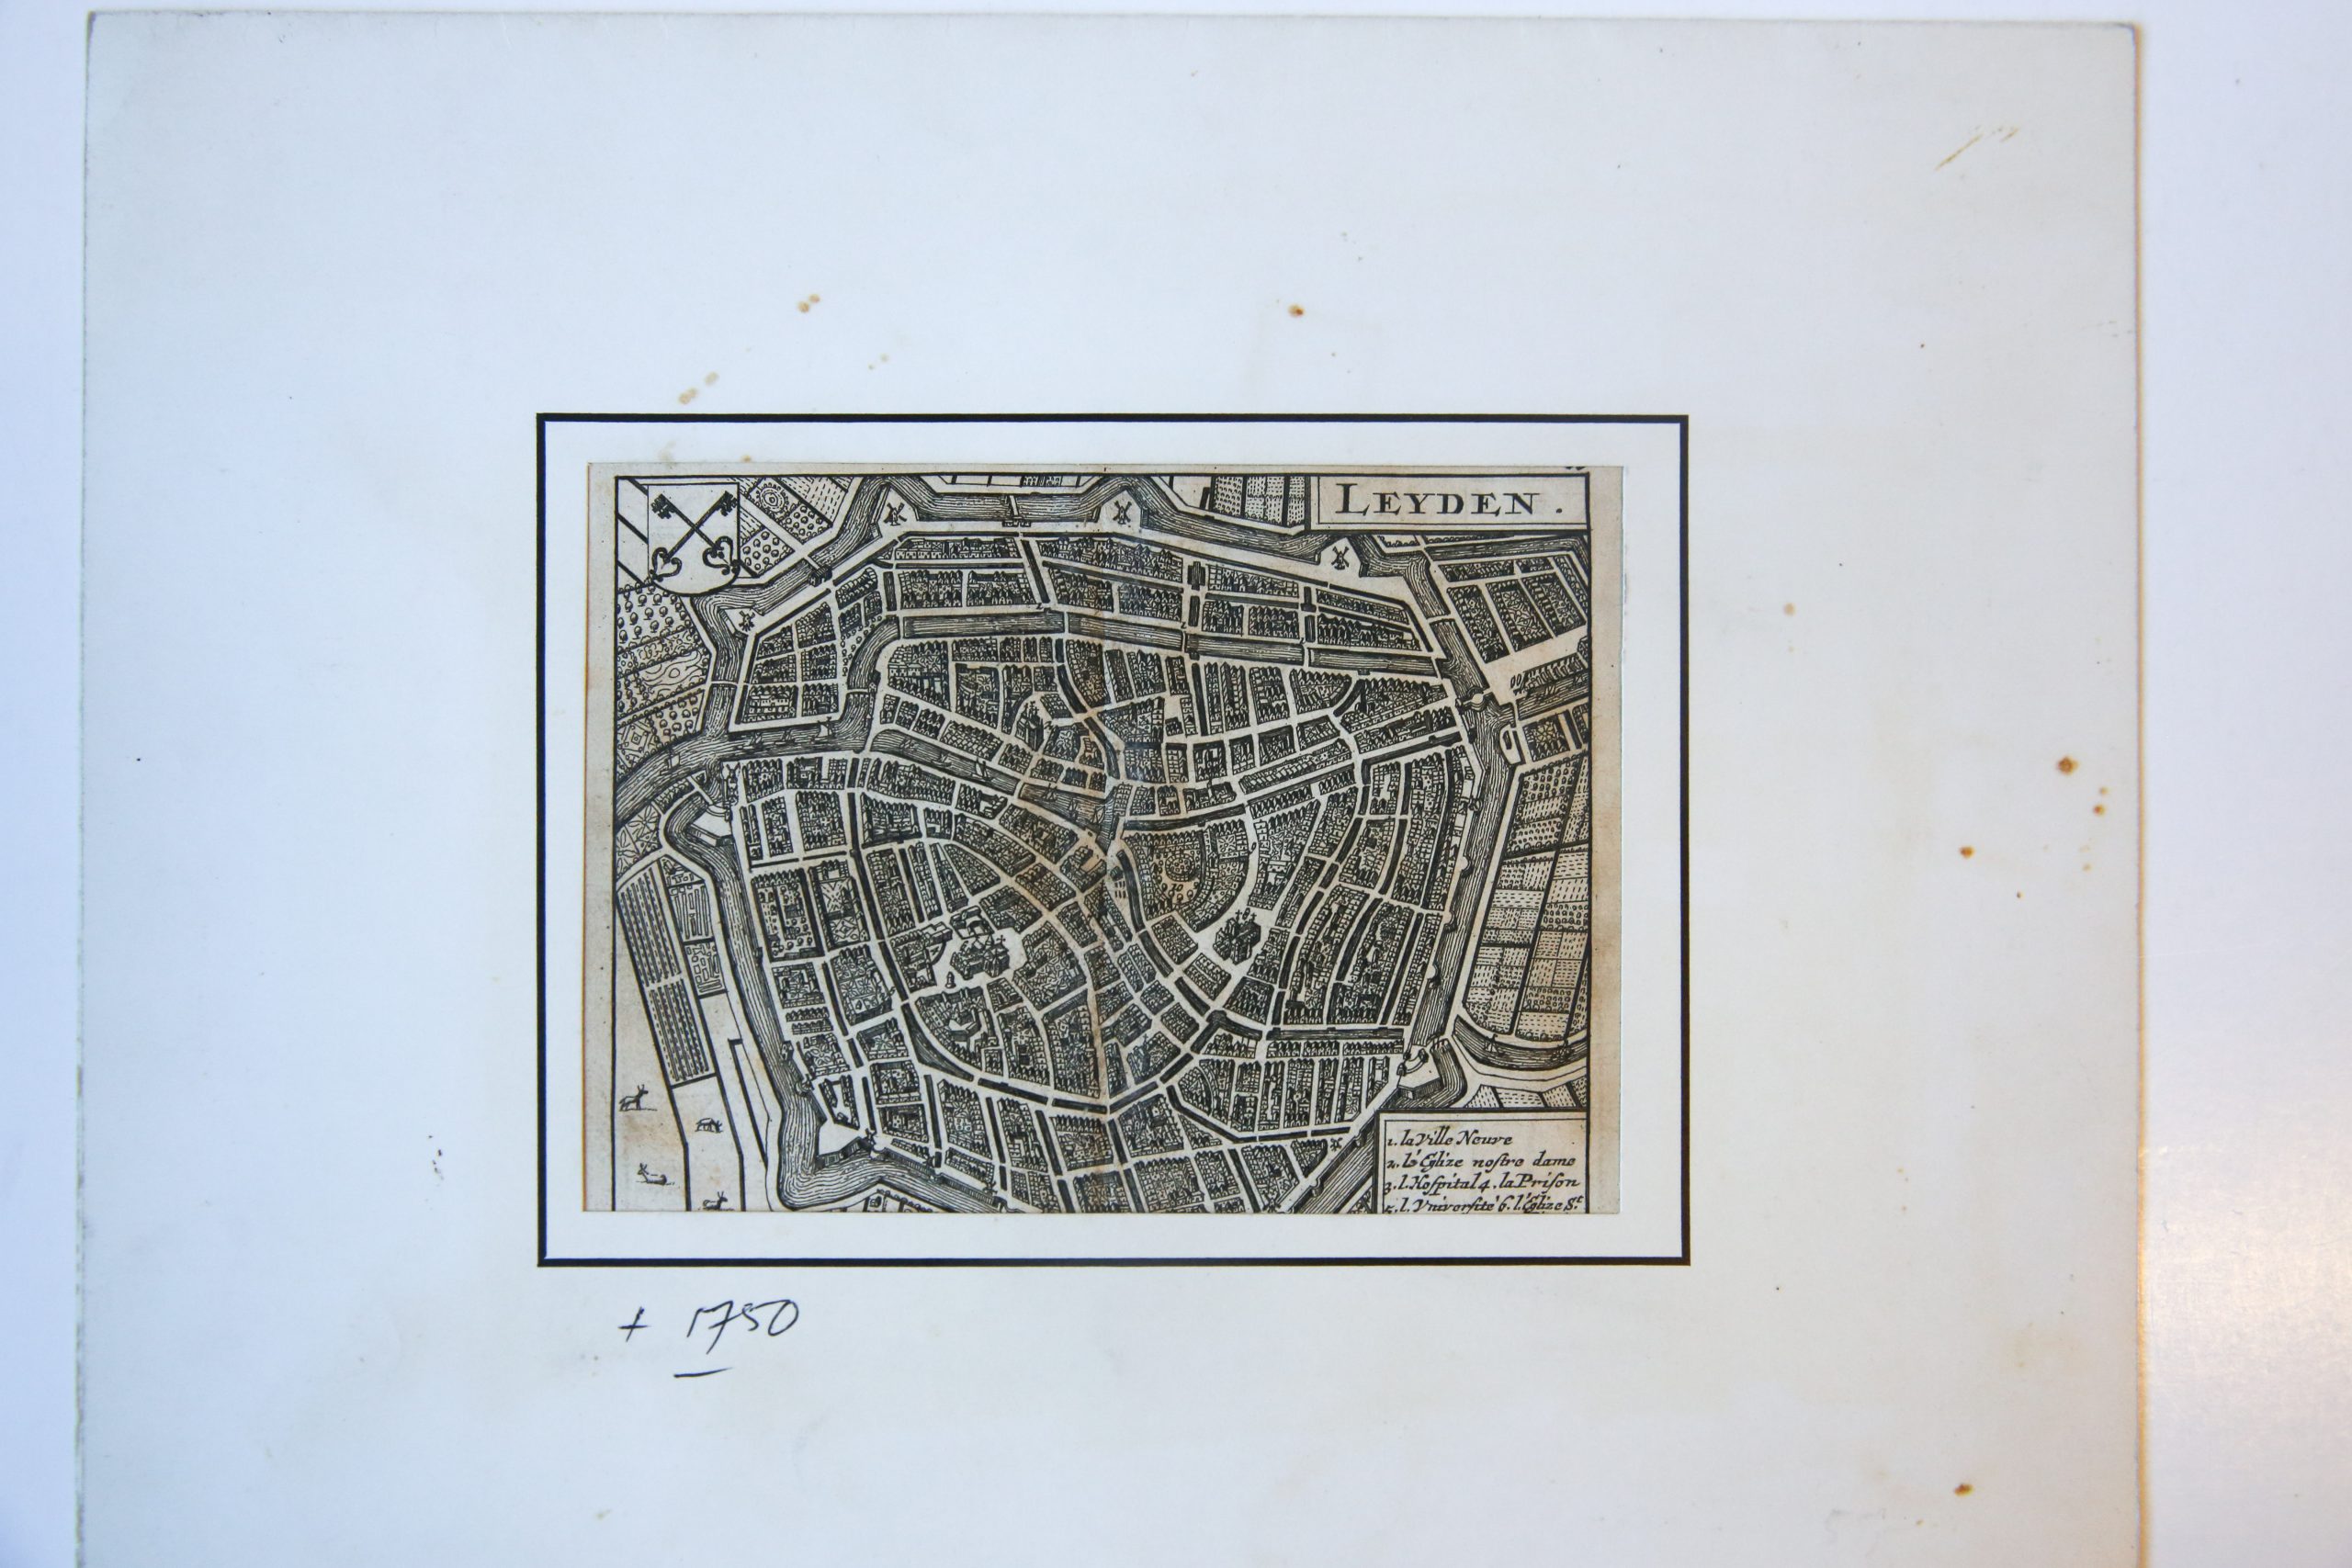 Kaart/Map of Leyden (Leiden), with in the right corner the city name Leyden, left top corner de Leidse sleuteltjes and 9 numbered place in the right bottom corner.